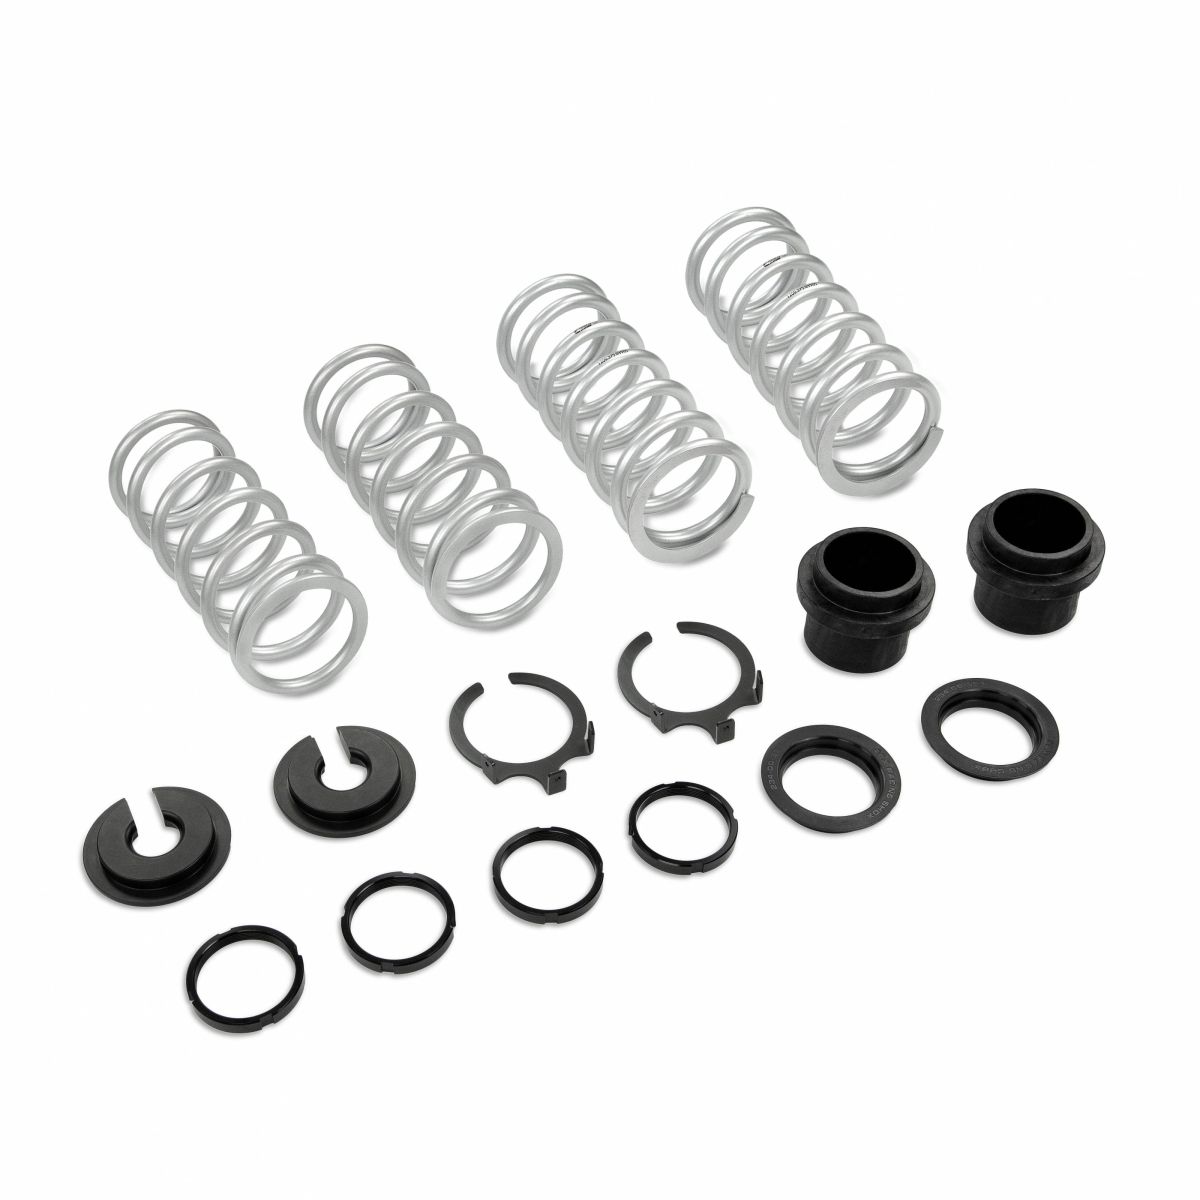 Cognito Motorsports - Cognito Dual Rate Front Spring Kit For Fox 3.0 Inch Shocks On 16-19 Polaris XP 4